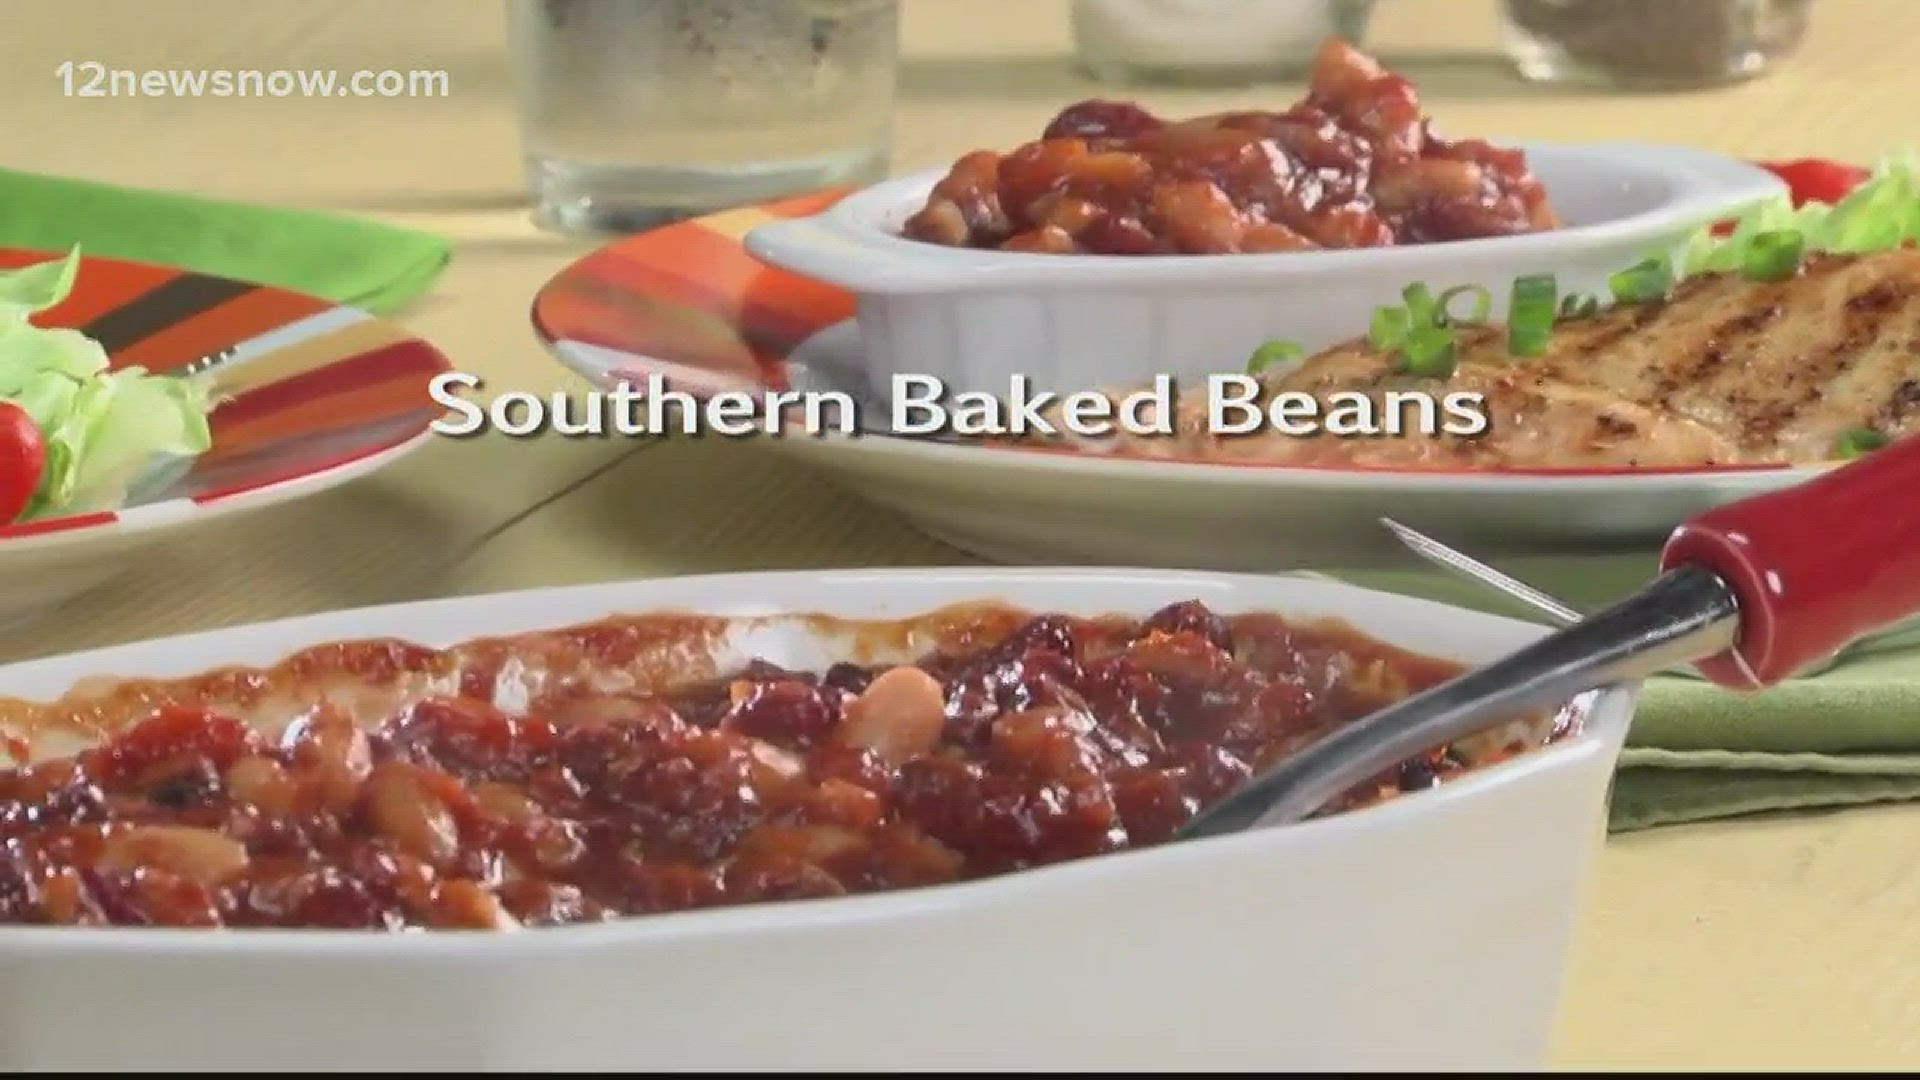 Mr. Food makes 'Southern Baked Beans'